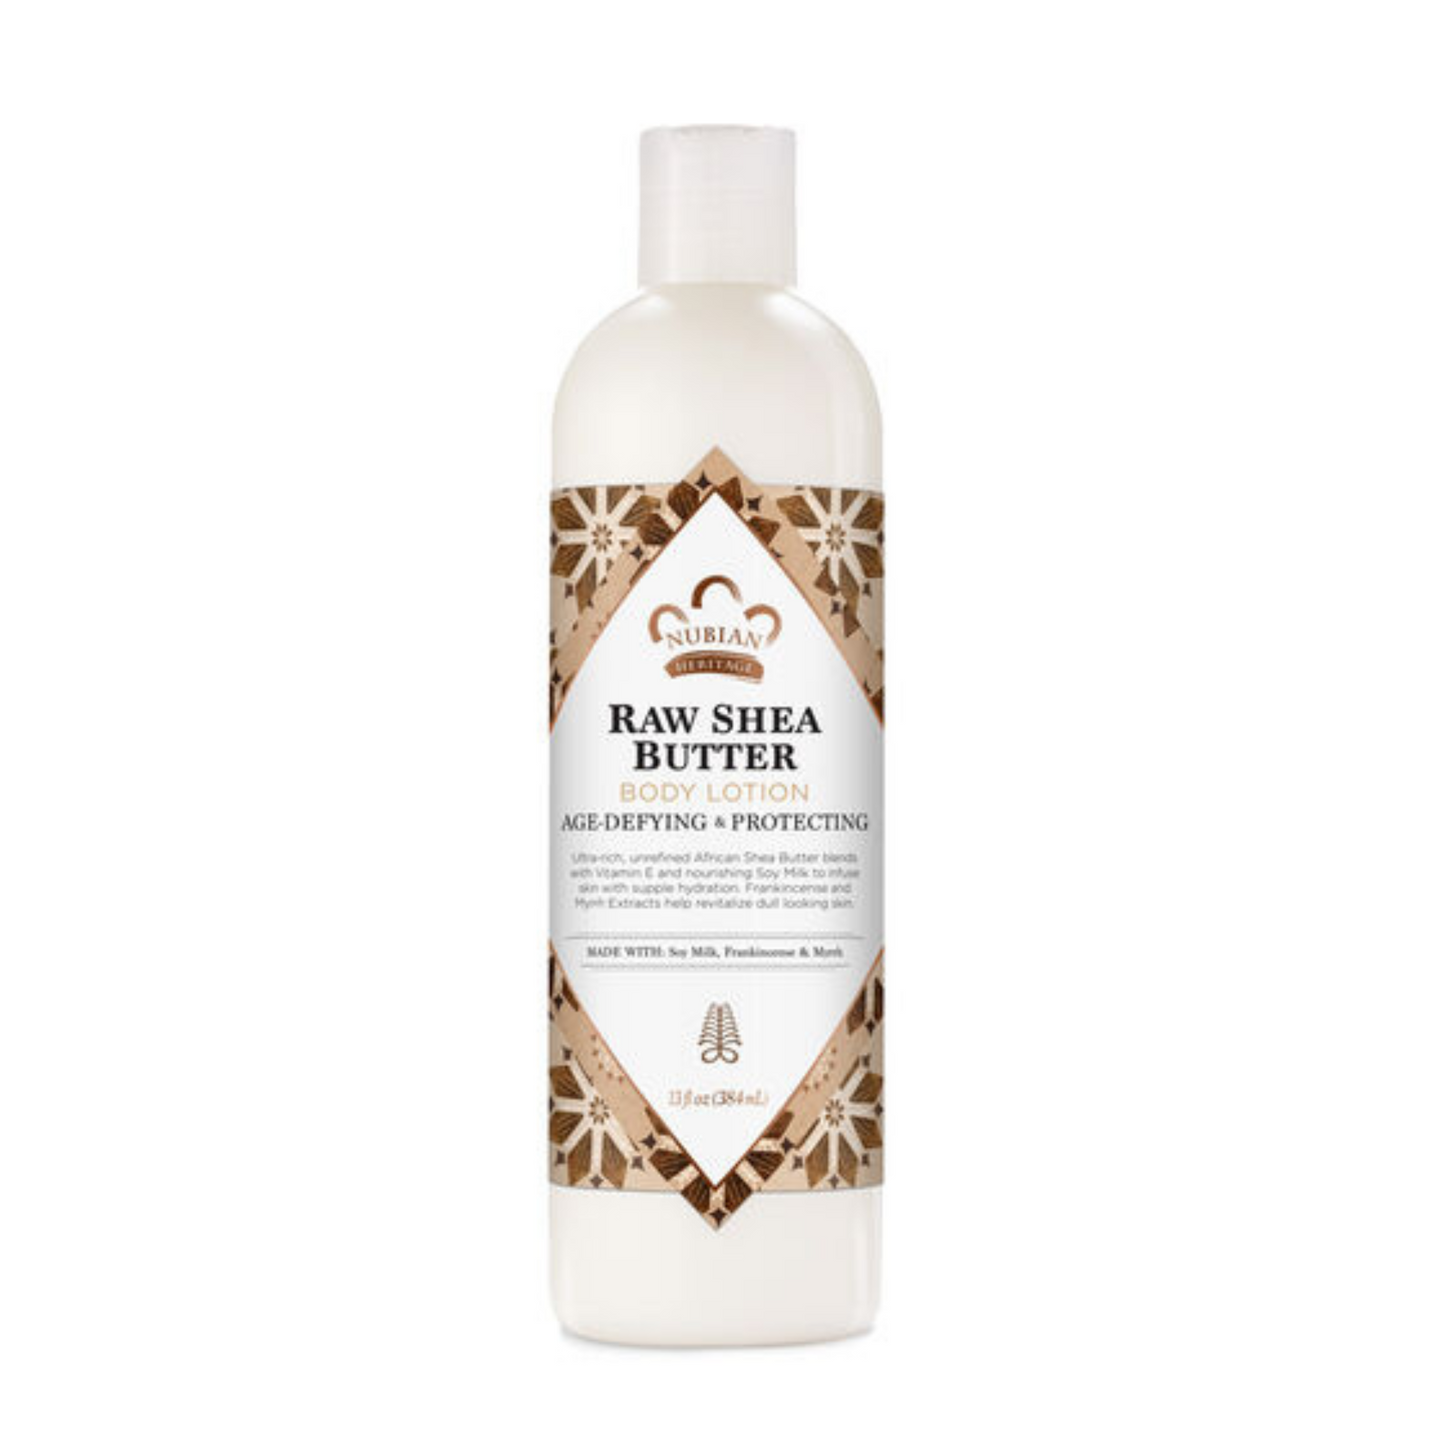 Primary Image of Nubian Heritage Raw Shea Butter Body Lotion (13 fl oz)